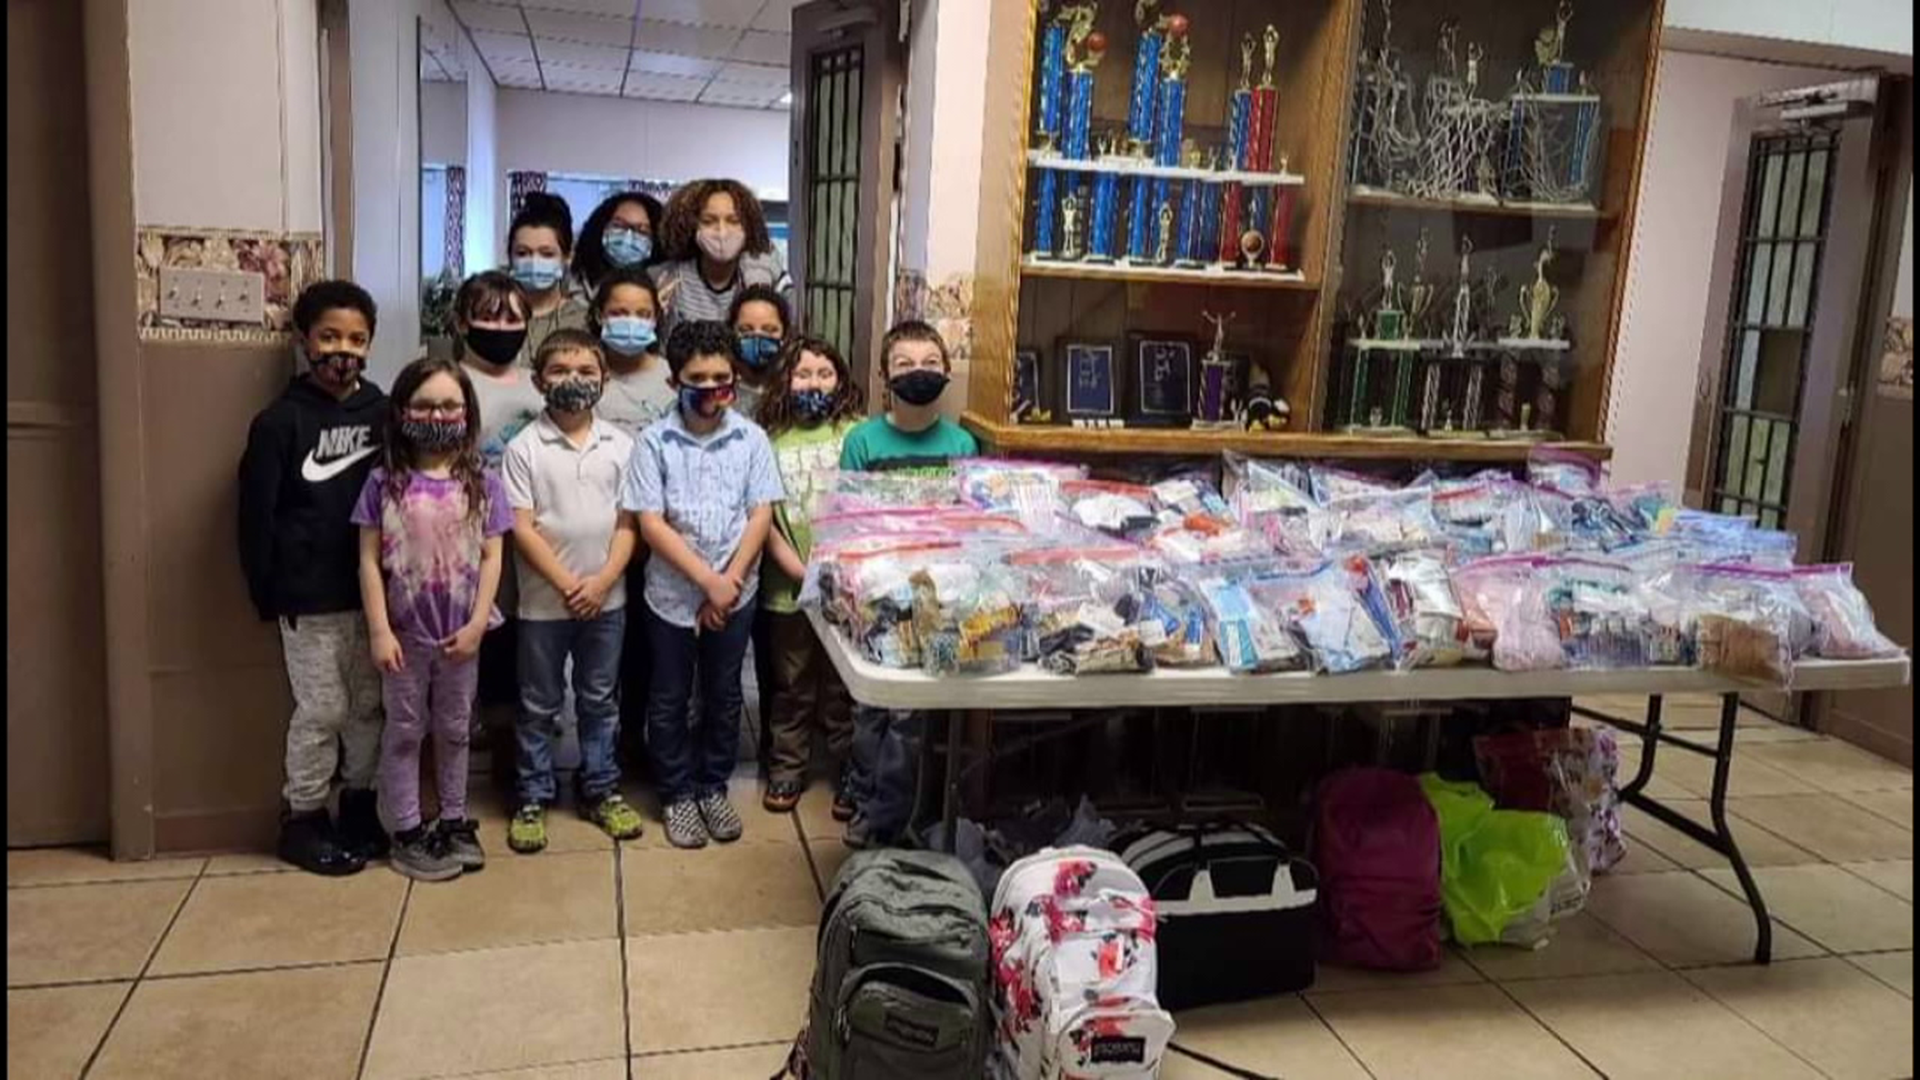 Students collect to help homeless